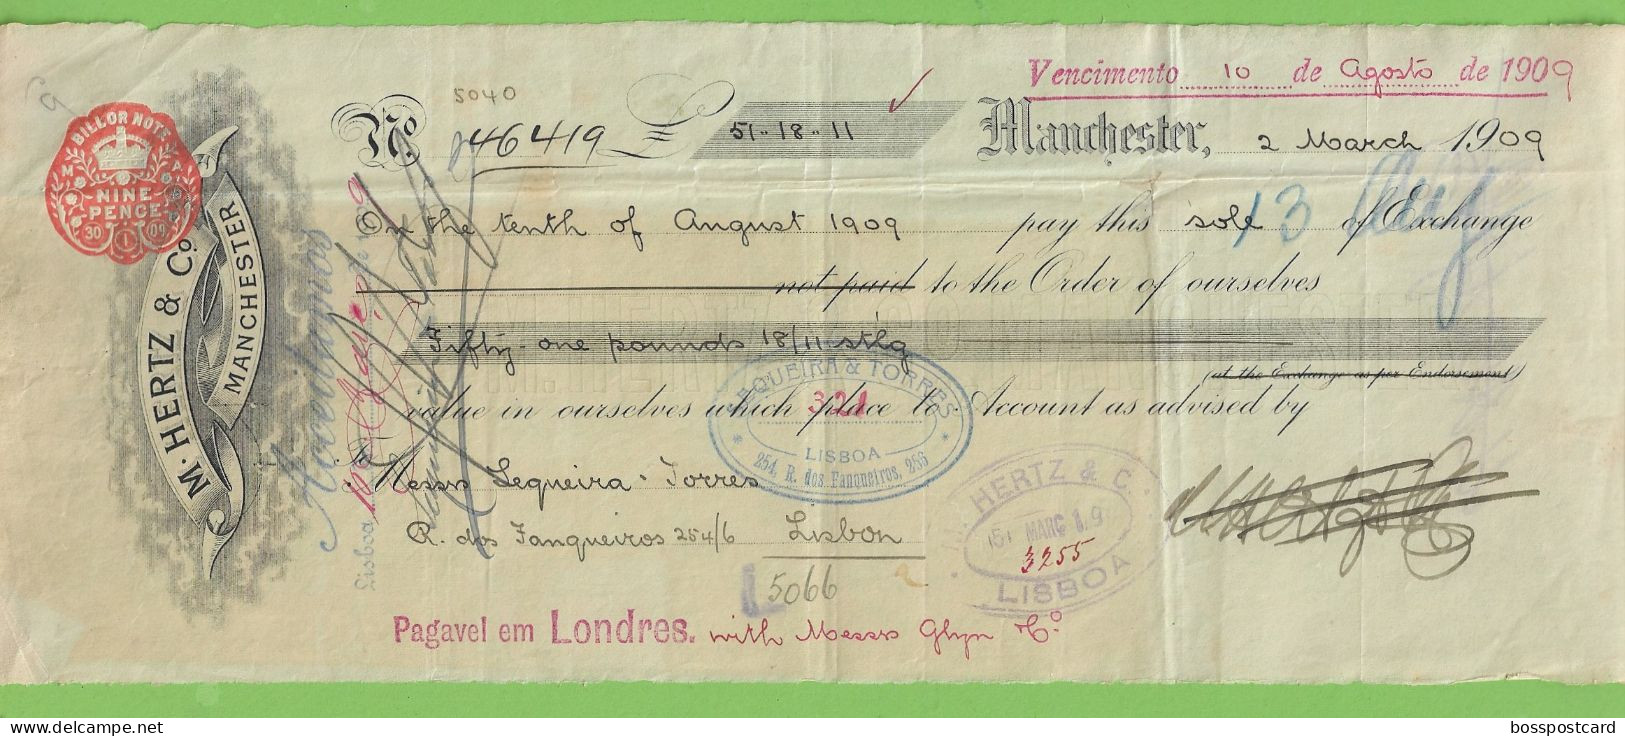 Manchester - Lettre - Bank - Lisboa - Portugal - England - Cheques & Traverler's Cheques